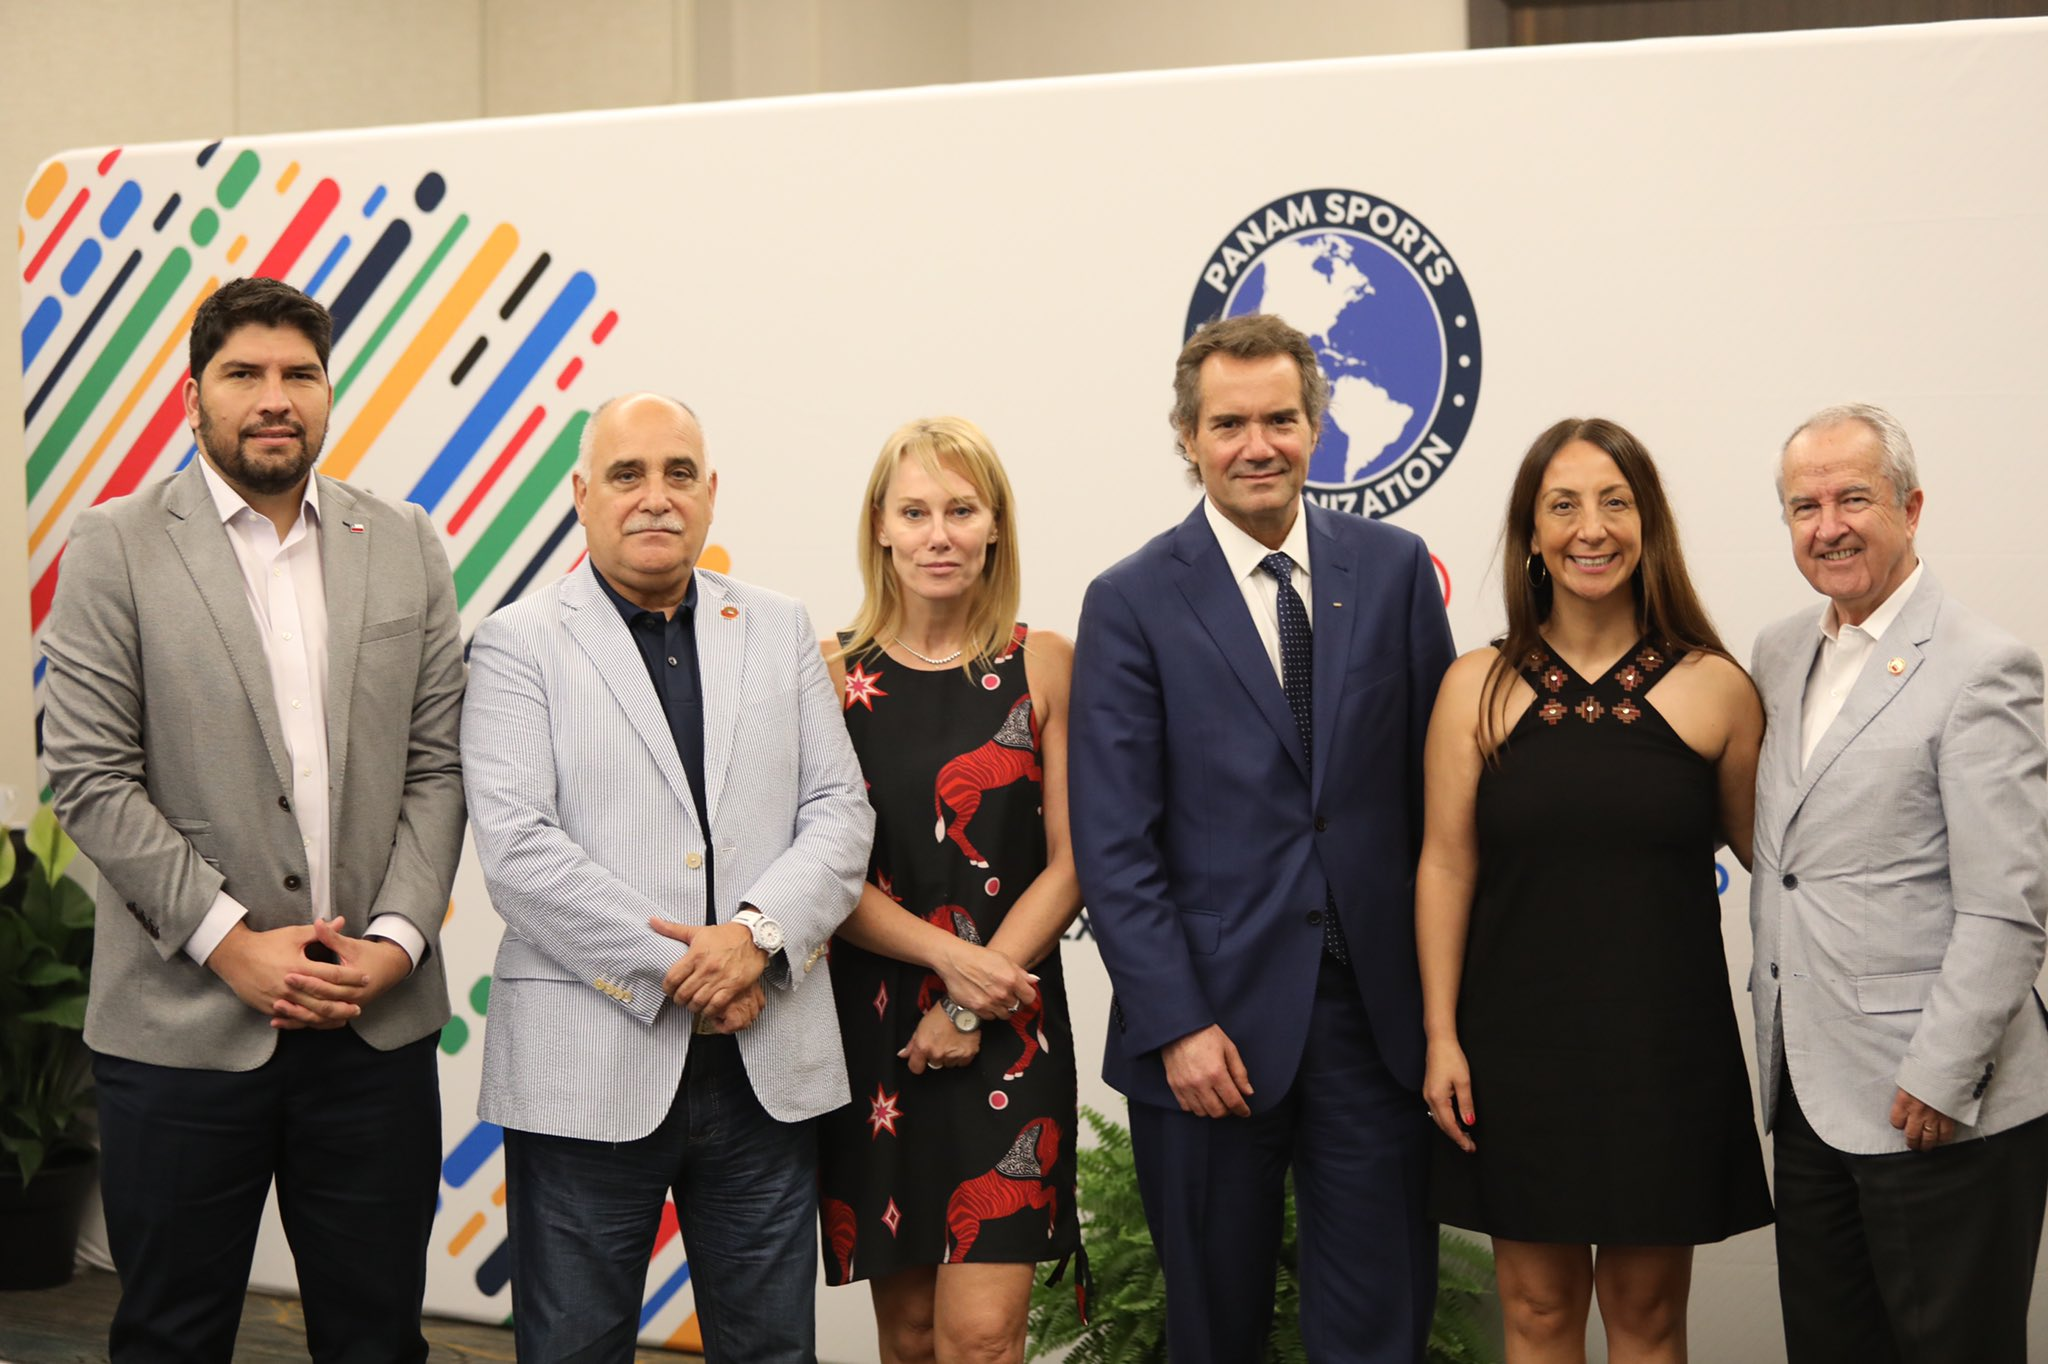 Panam Sports President Neven Ilic said key decisions will soon be taken over the sports and infrastructure for the Games ©Panam Sports